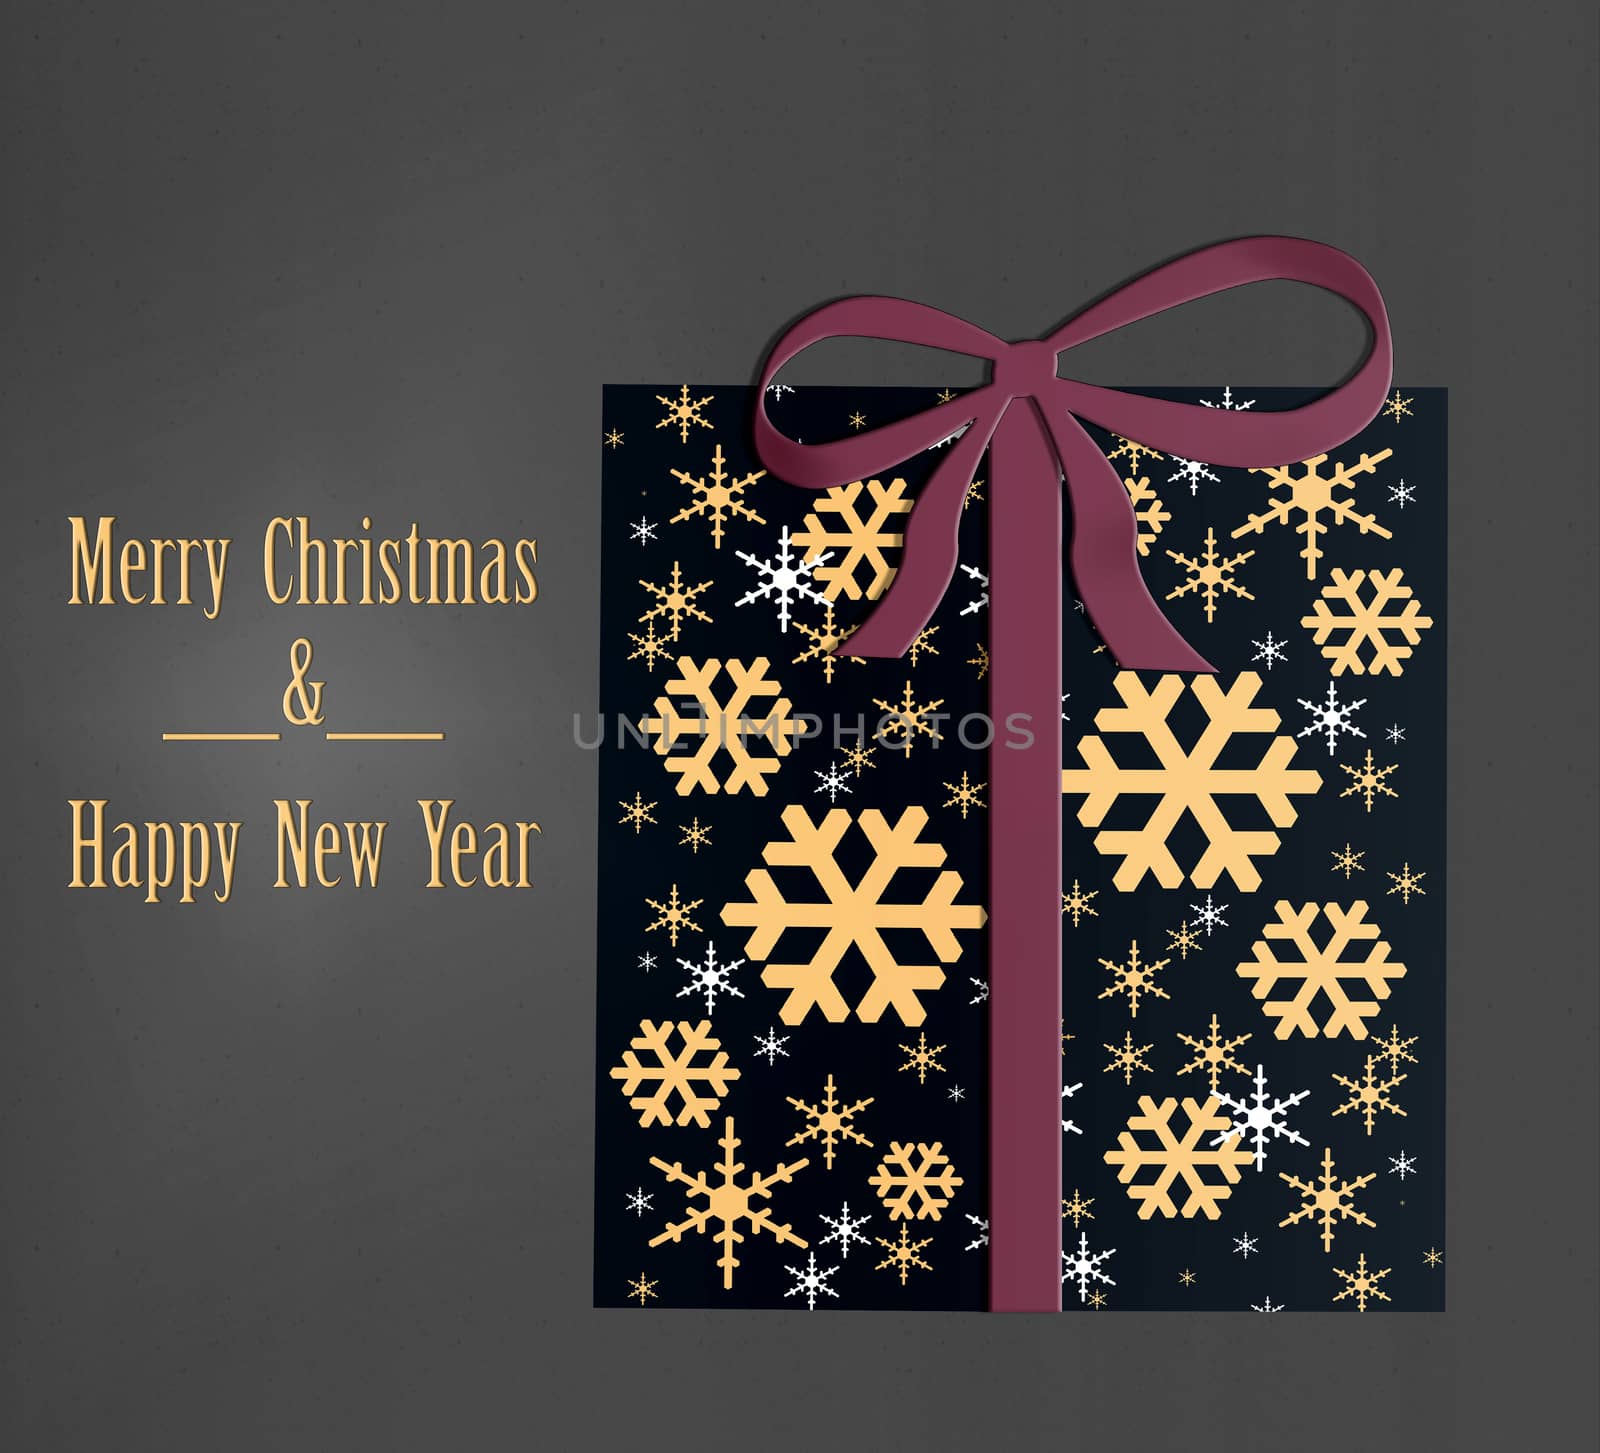 Greeting card concept with the words Merry Christmas and Happy New Year. by NelliPolk